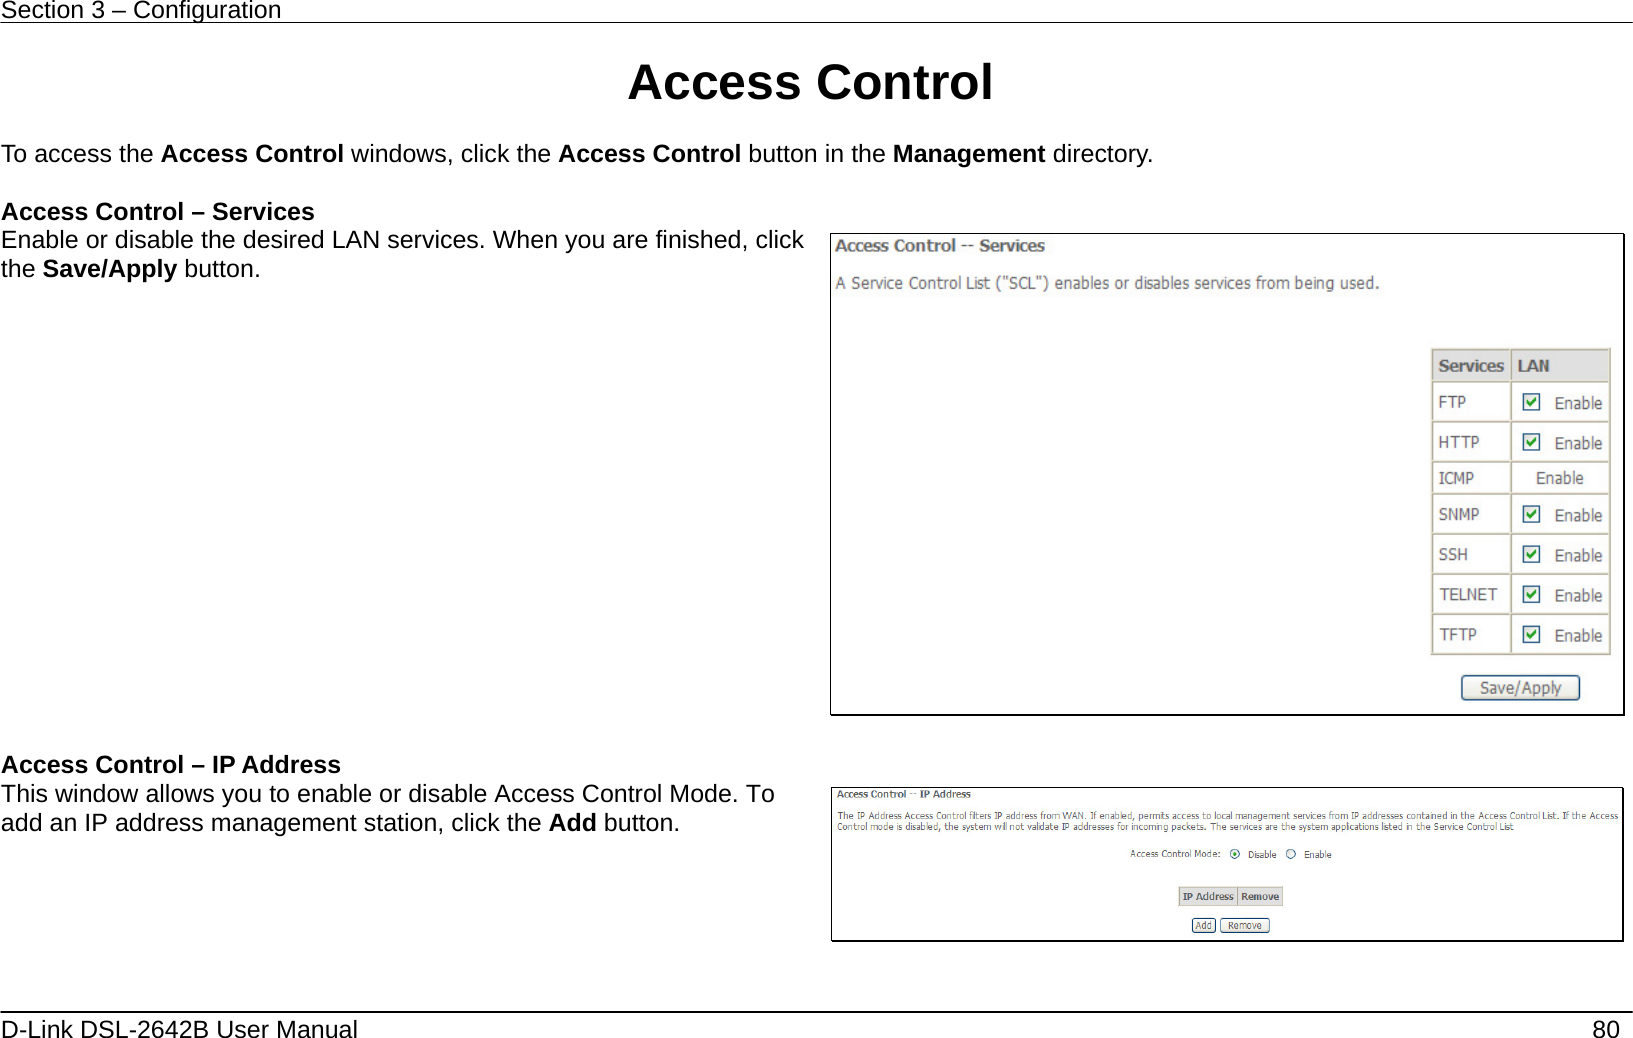 Section 3 – Configuration   D-Link DSL-2642B User Manual    80 Access Control  To access the Access Control windows, click the Access Control button in the Management directory.  Access Control – Services Enable or disable the desired LAN services. When you are finished, click the Save/Apply button.   Access Control – IP Address This window allows you to enable or disable Access Control Mode. To add an IP address management station, click the Add button.   